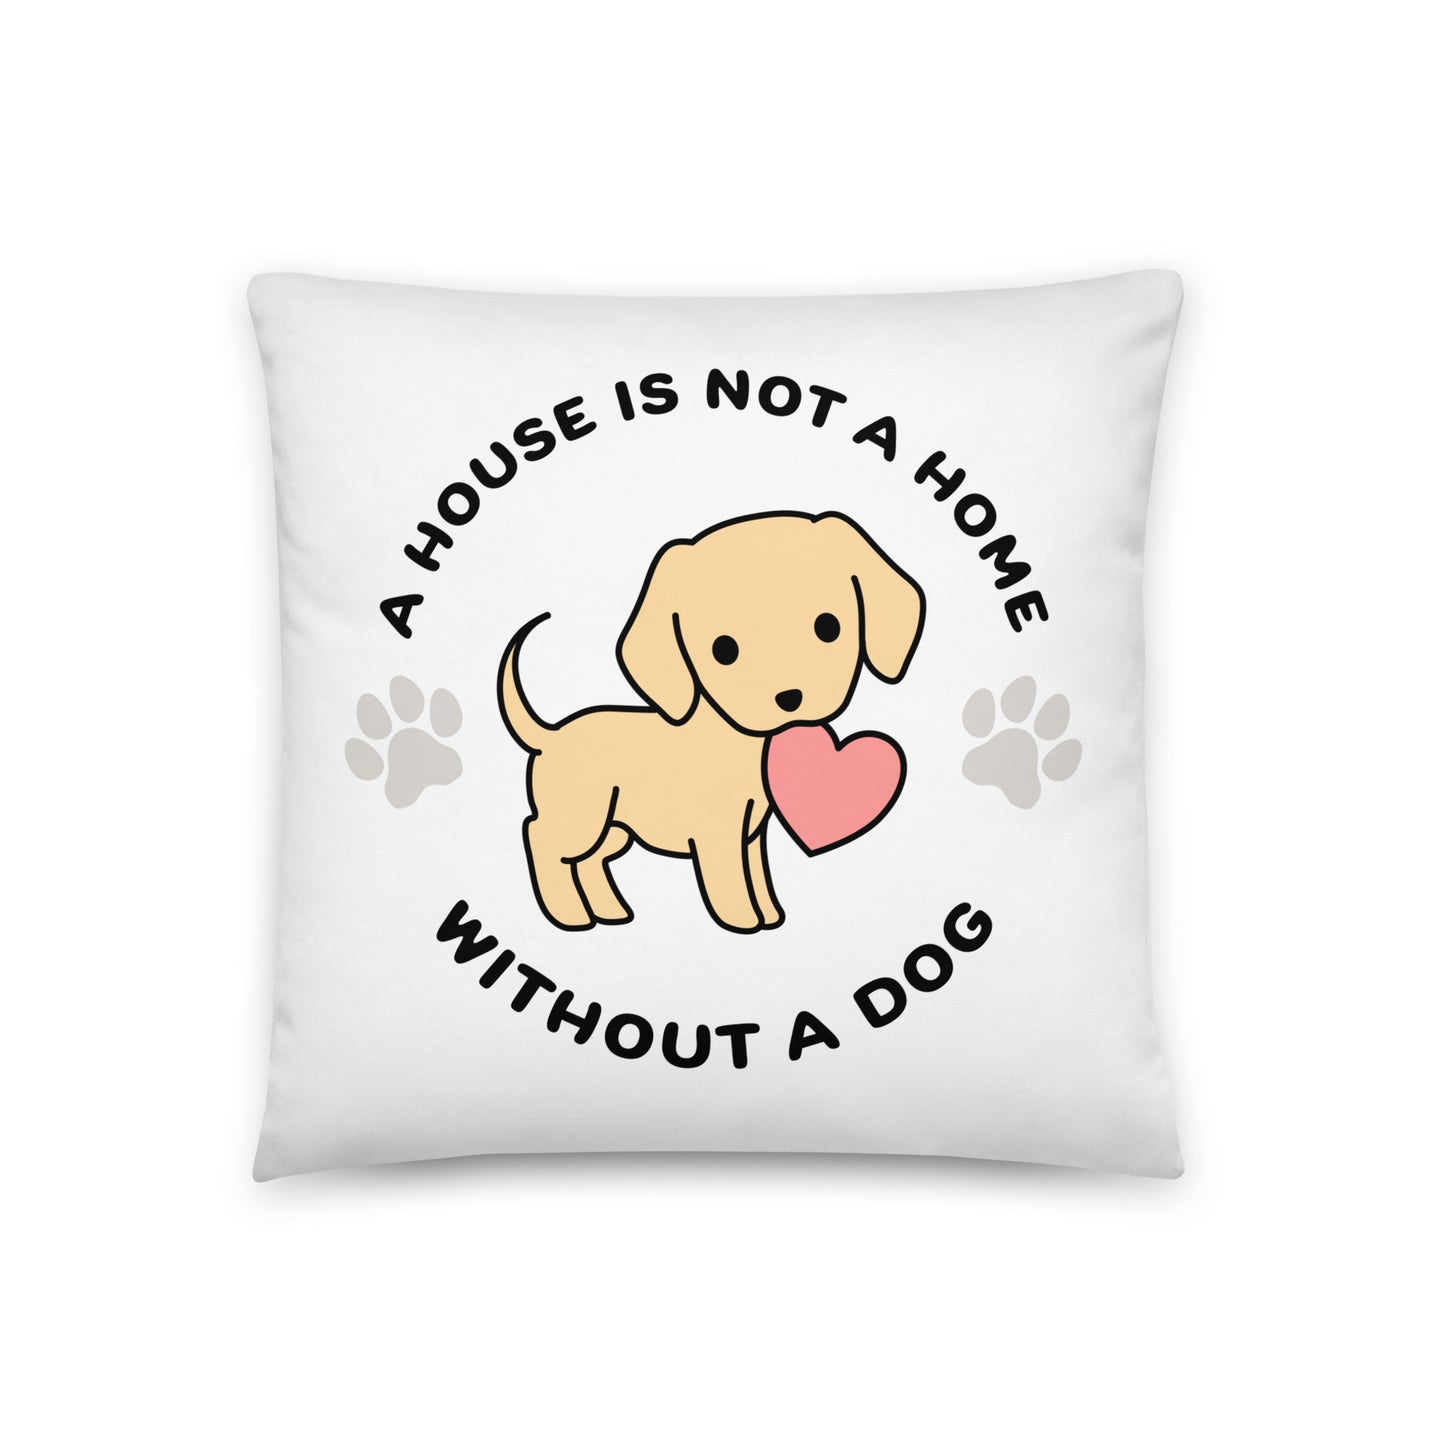 A white, 18" x 18" pillow featuing a cute, stylized illustration of a Yellow Lab holding a heart in its mouth. Text in a circle around the dog reads "A house is not a home without a dog"